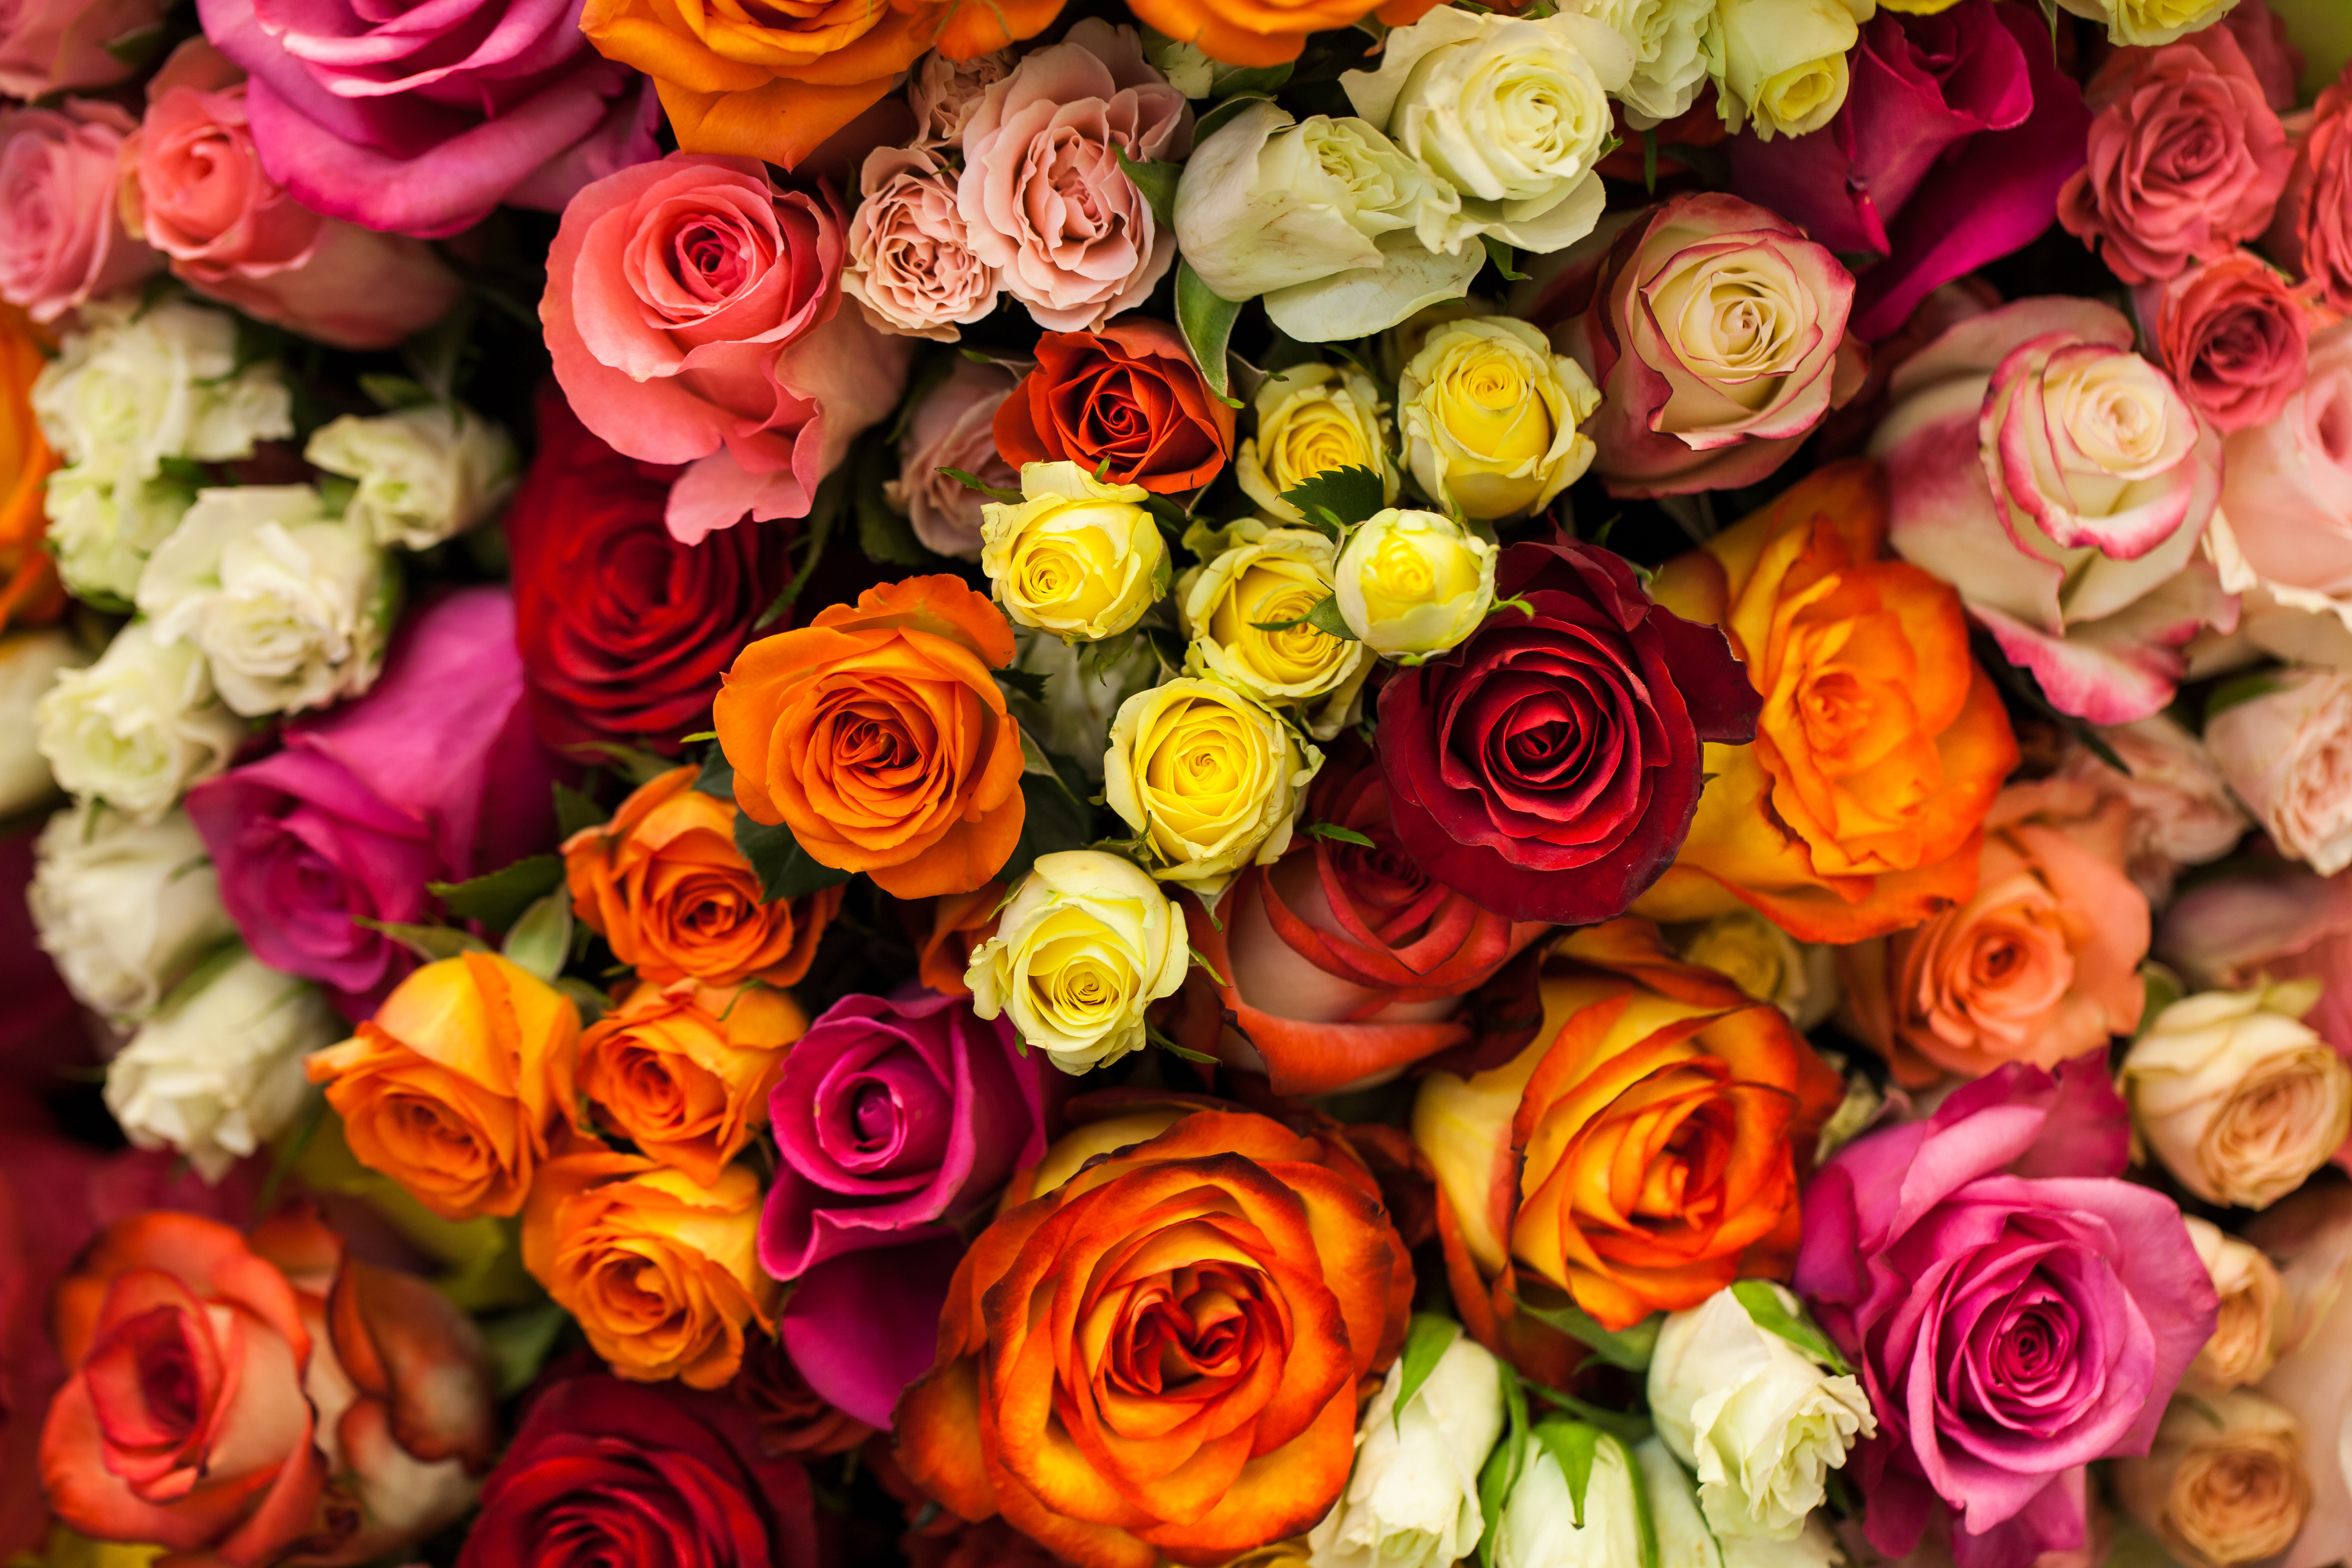 What Does The Color Of Roses Really Mean? - Eco18